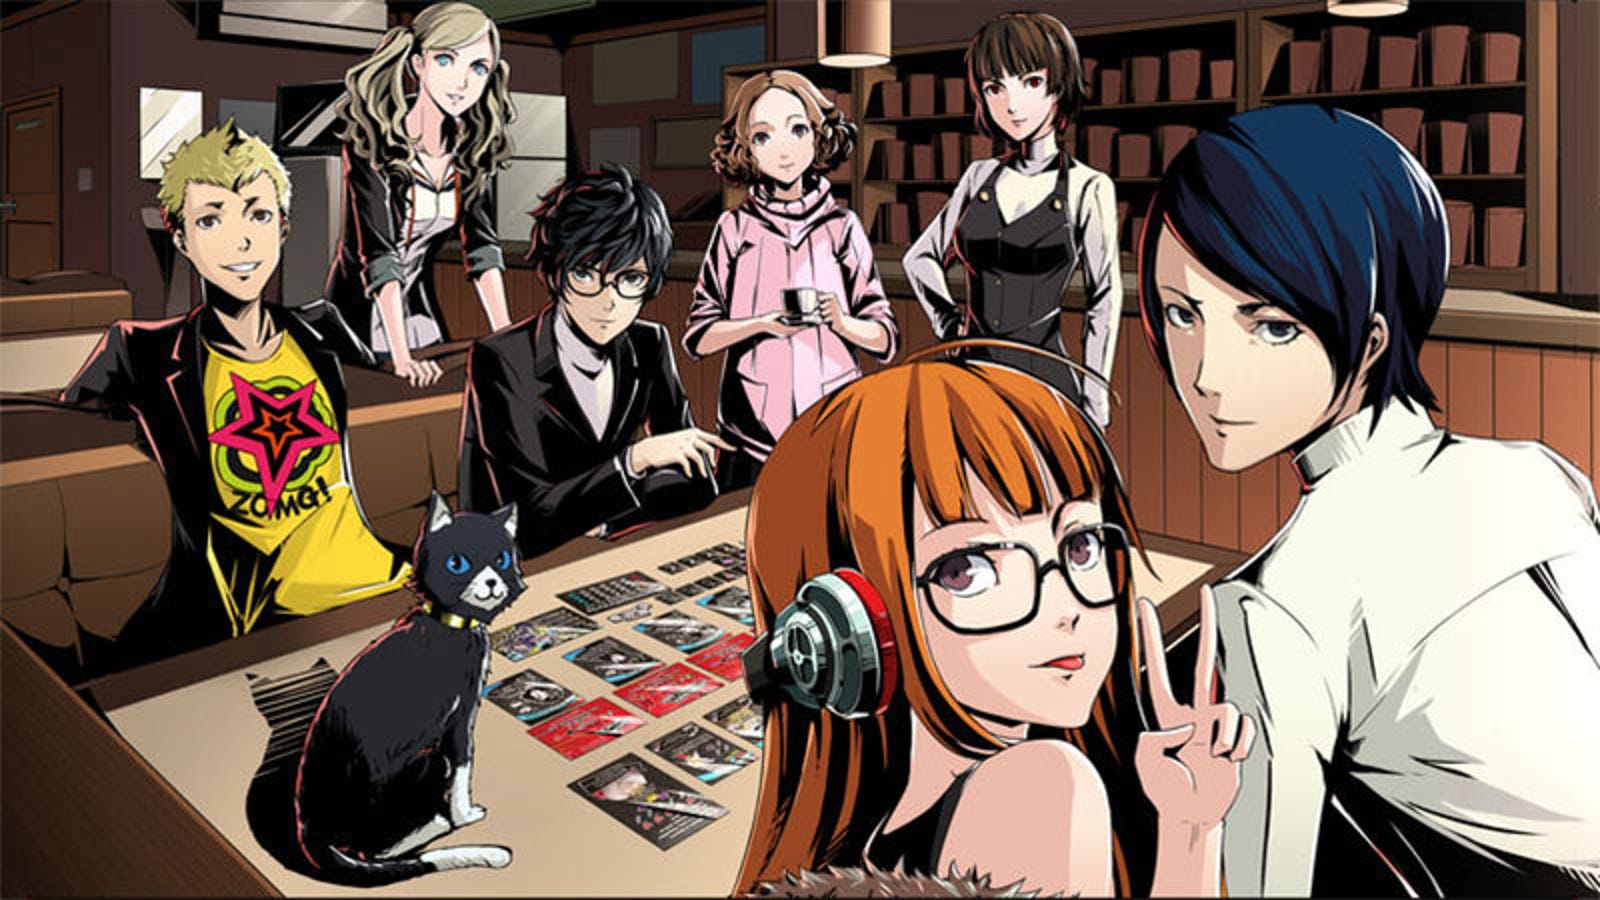 There's A (Fan-Made) Persona 5 Board Game, And It's Great